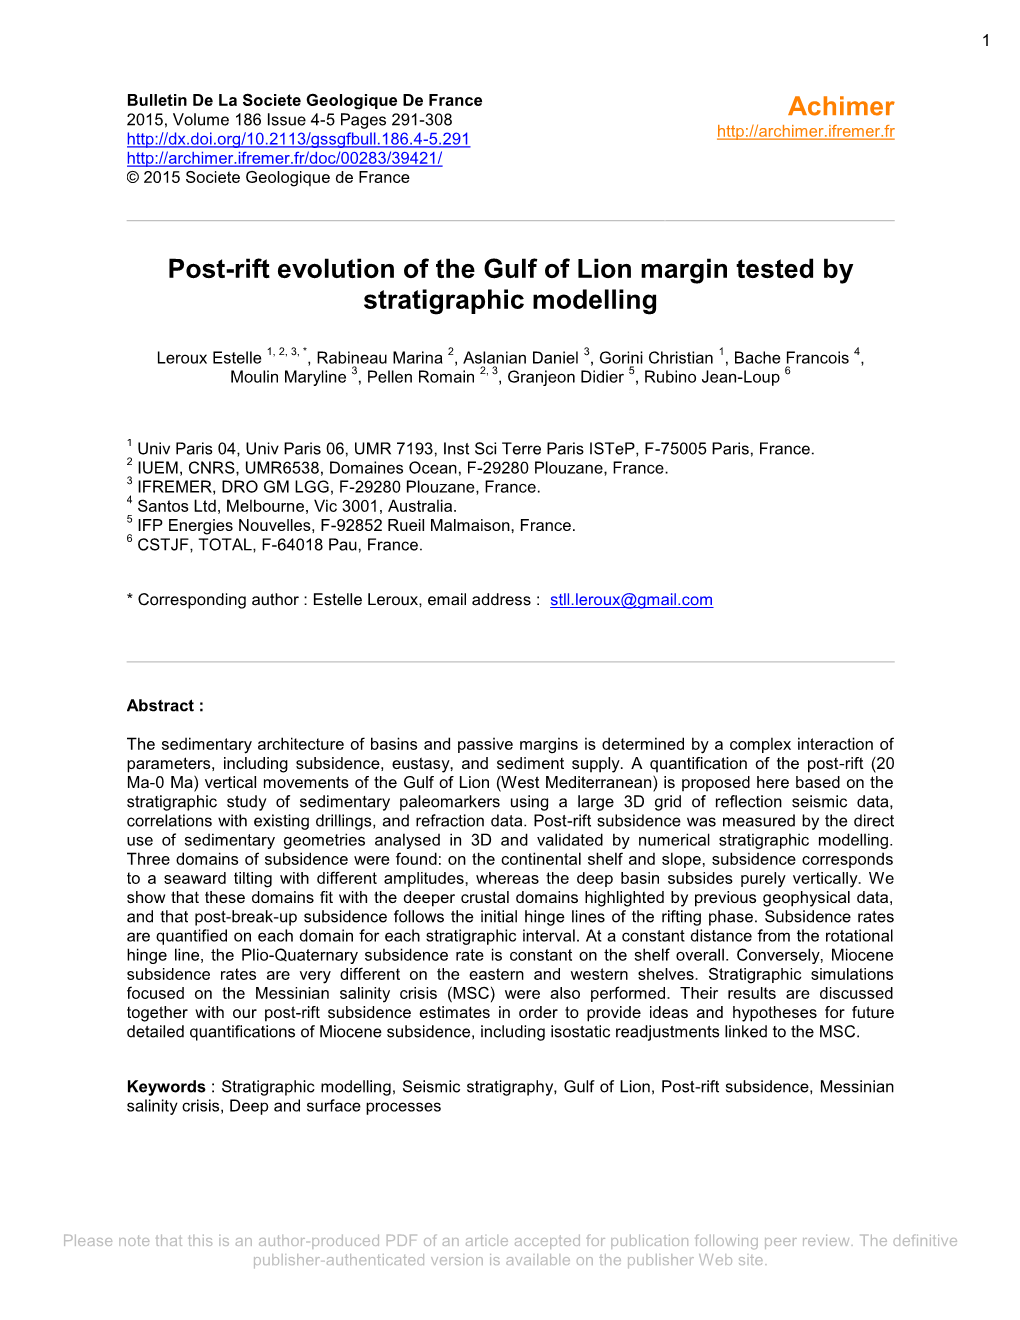 Post-Rift Evolution of the Gulf of Lion Margin Tested by Stratigraphic Modelling